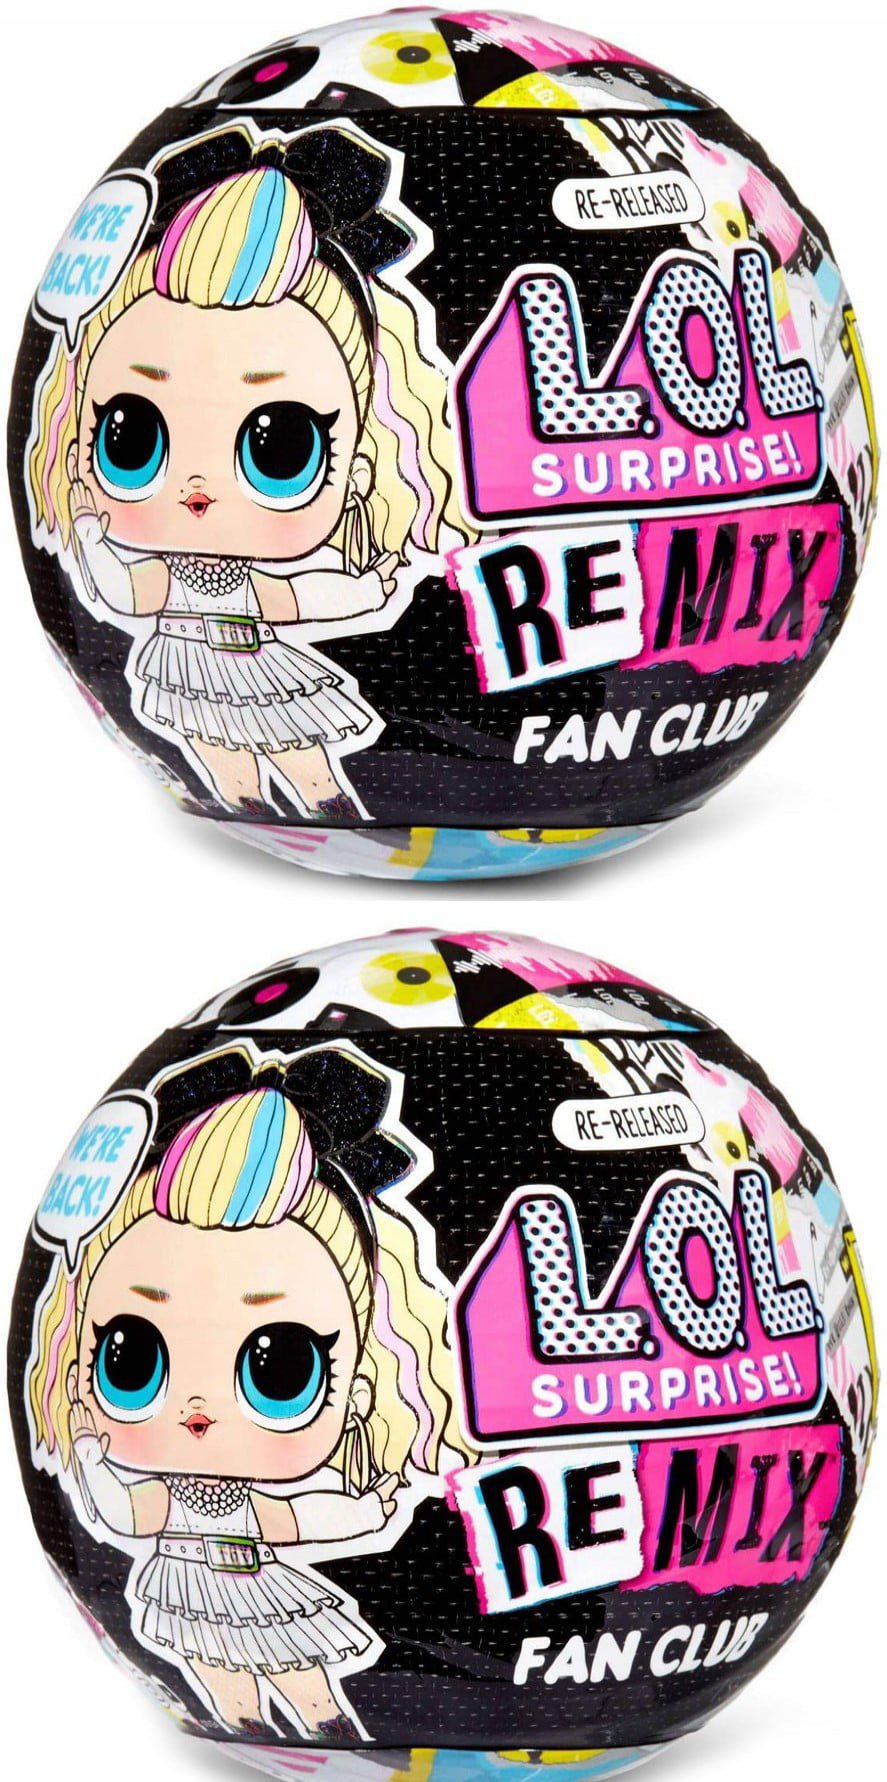 LOL Surprise Remix Fan Club 4 Pack 4 Re-released Dolls each with 7 Surprises NEW